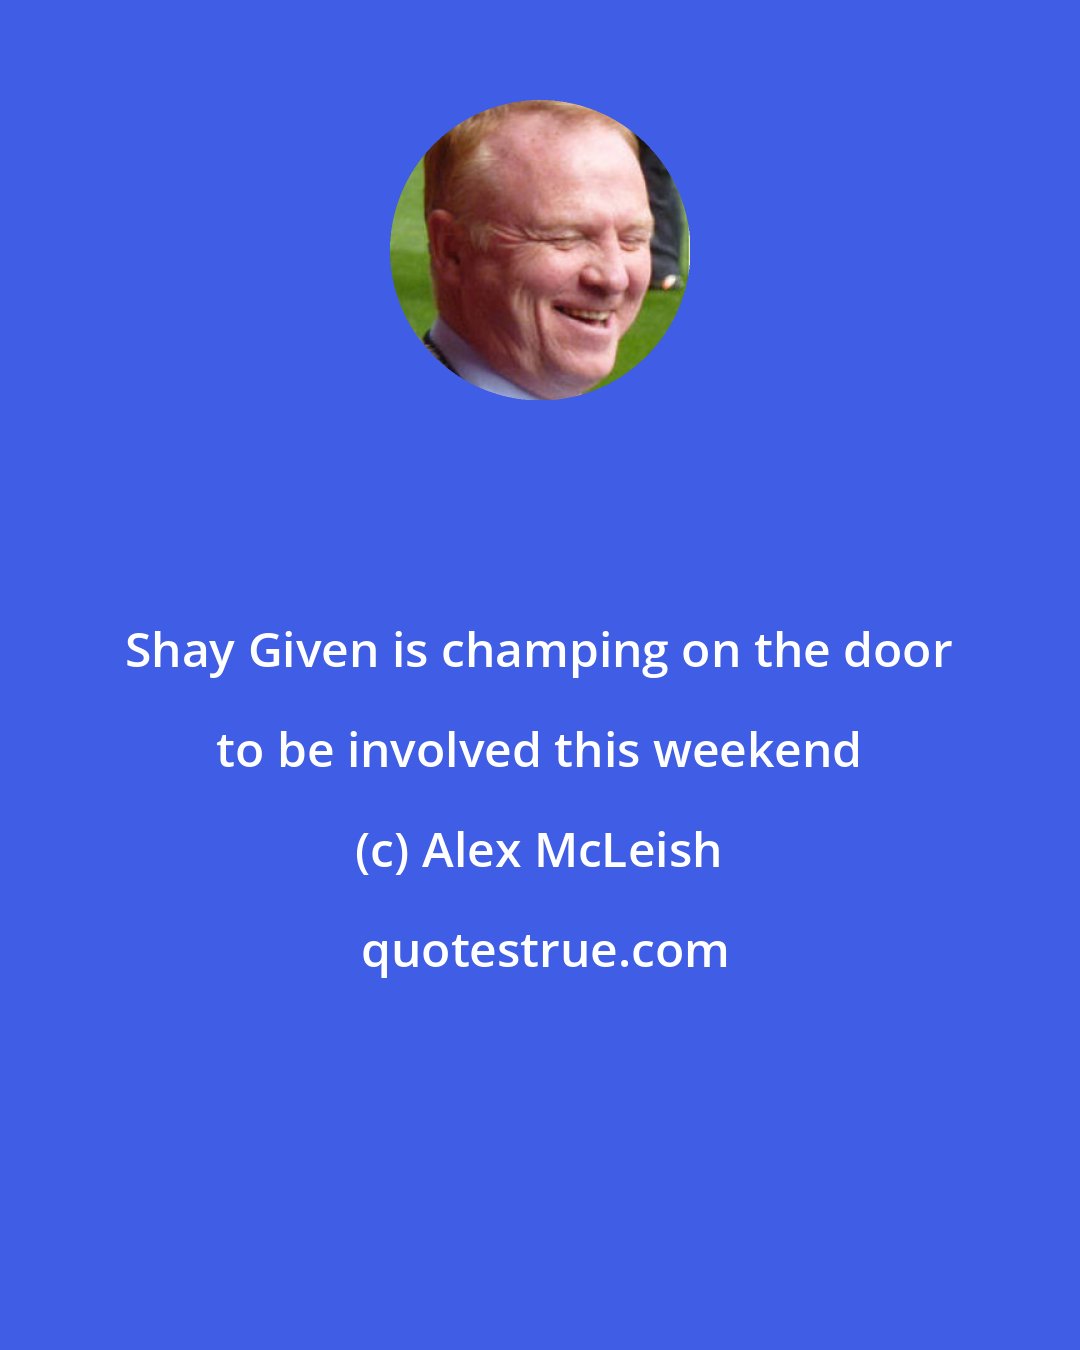 Alex McLeish: Shay Given is champing on the door to be involved this weekend